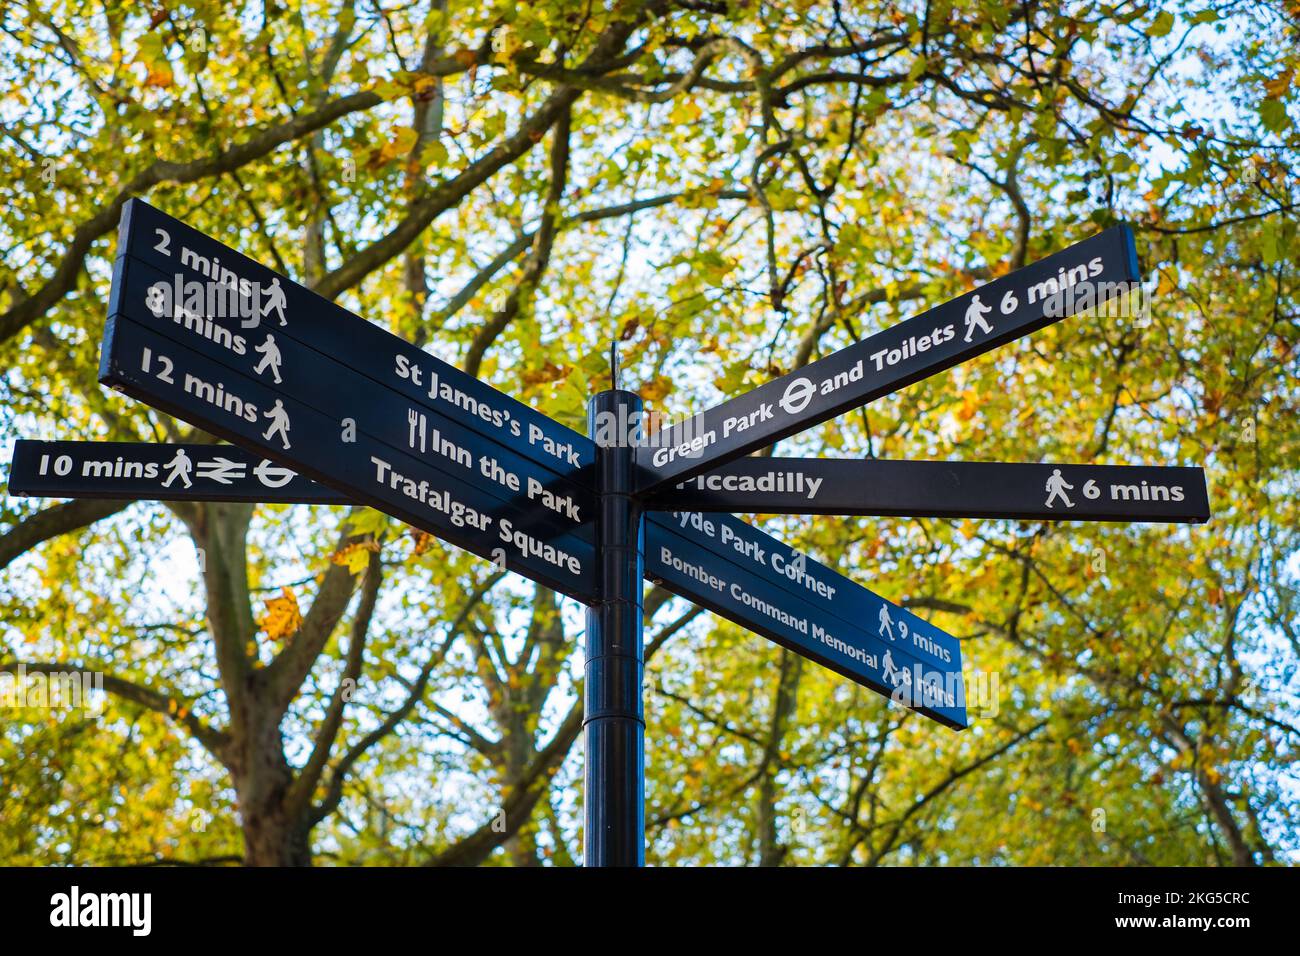 Guide arrows showing different popular directions and walking distances in London city tourist area. London sightseeing signpost. Stock Photo